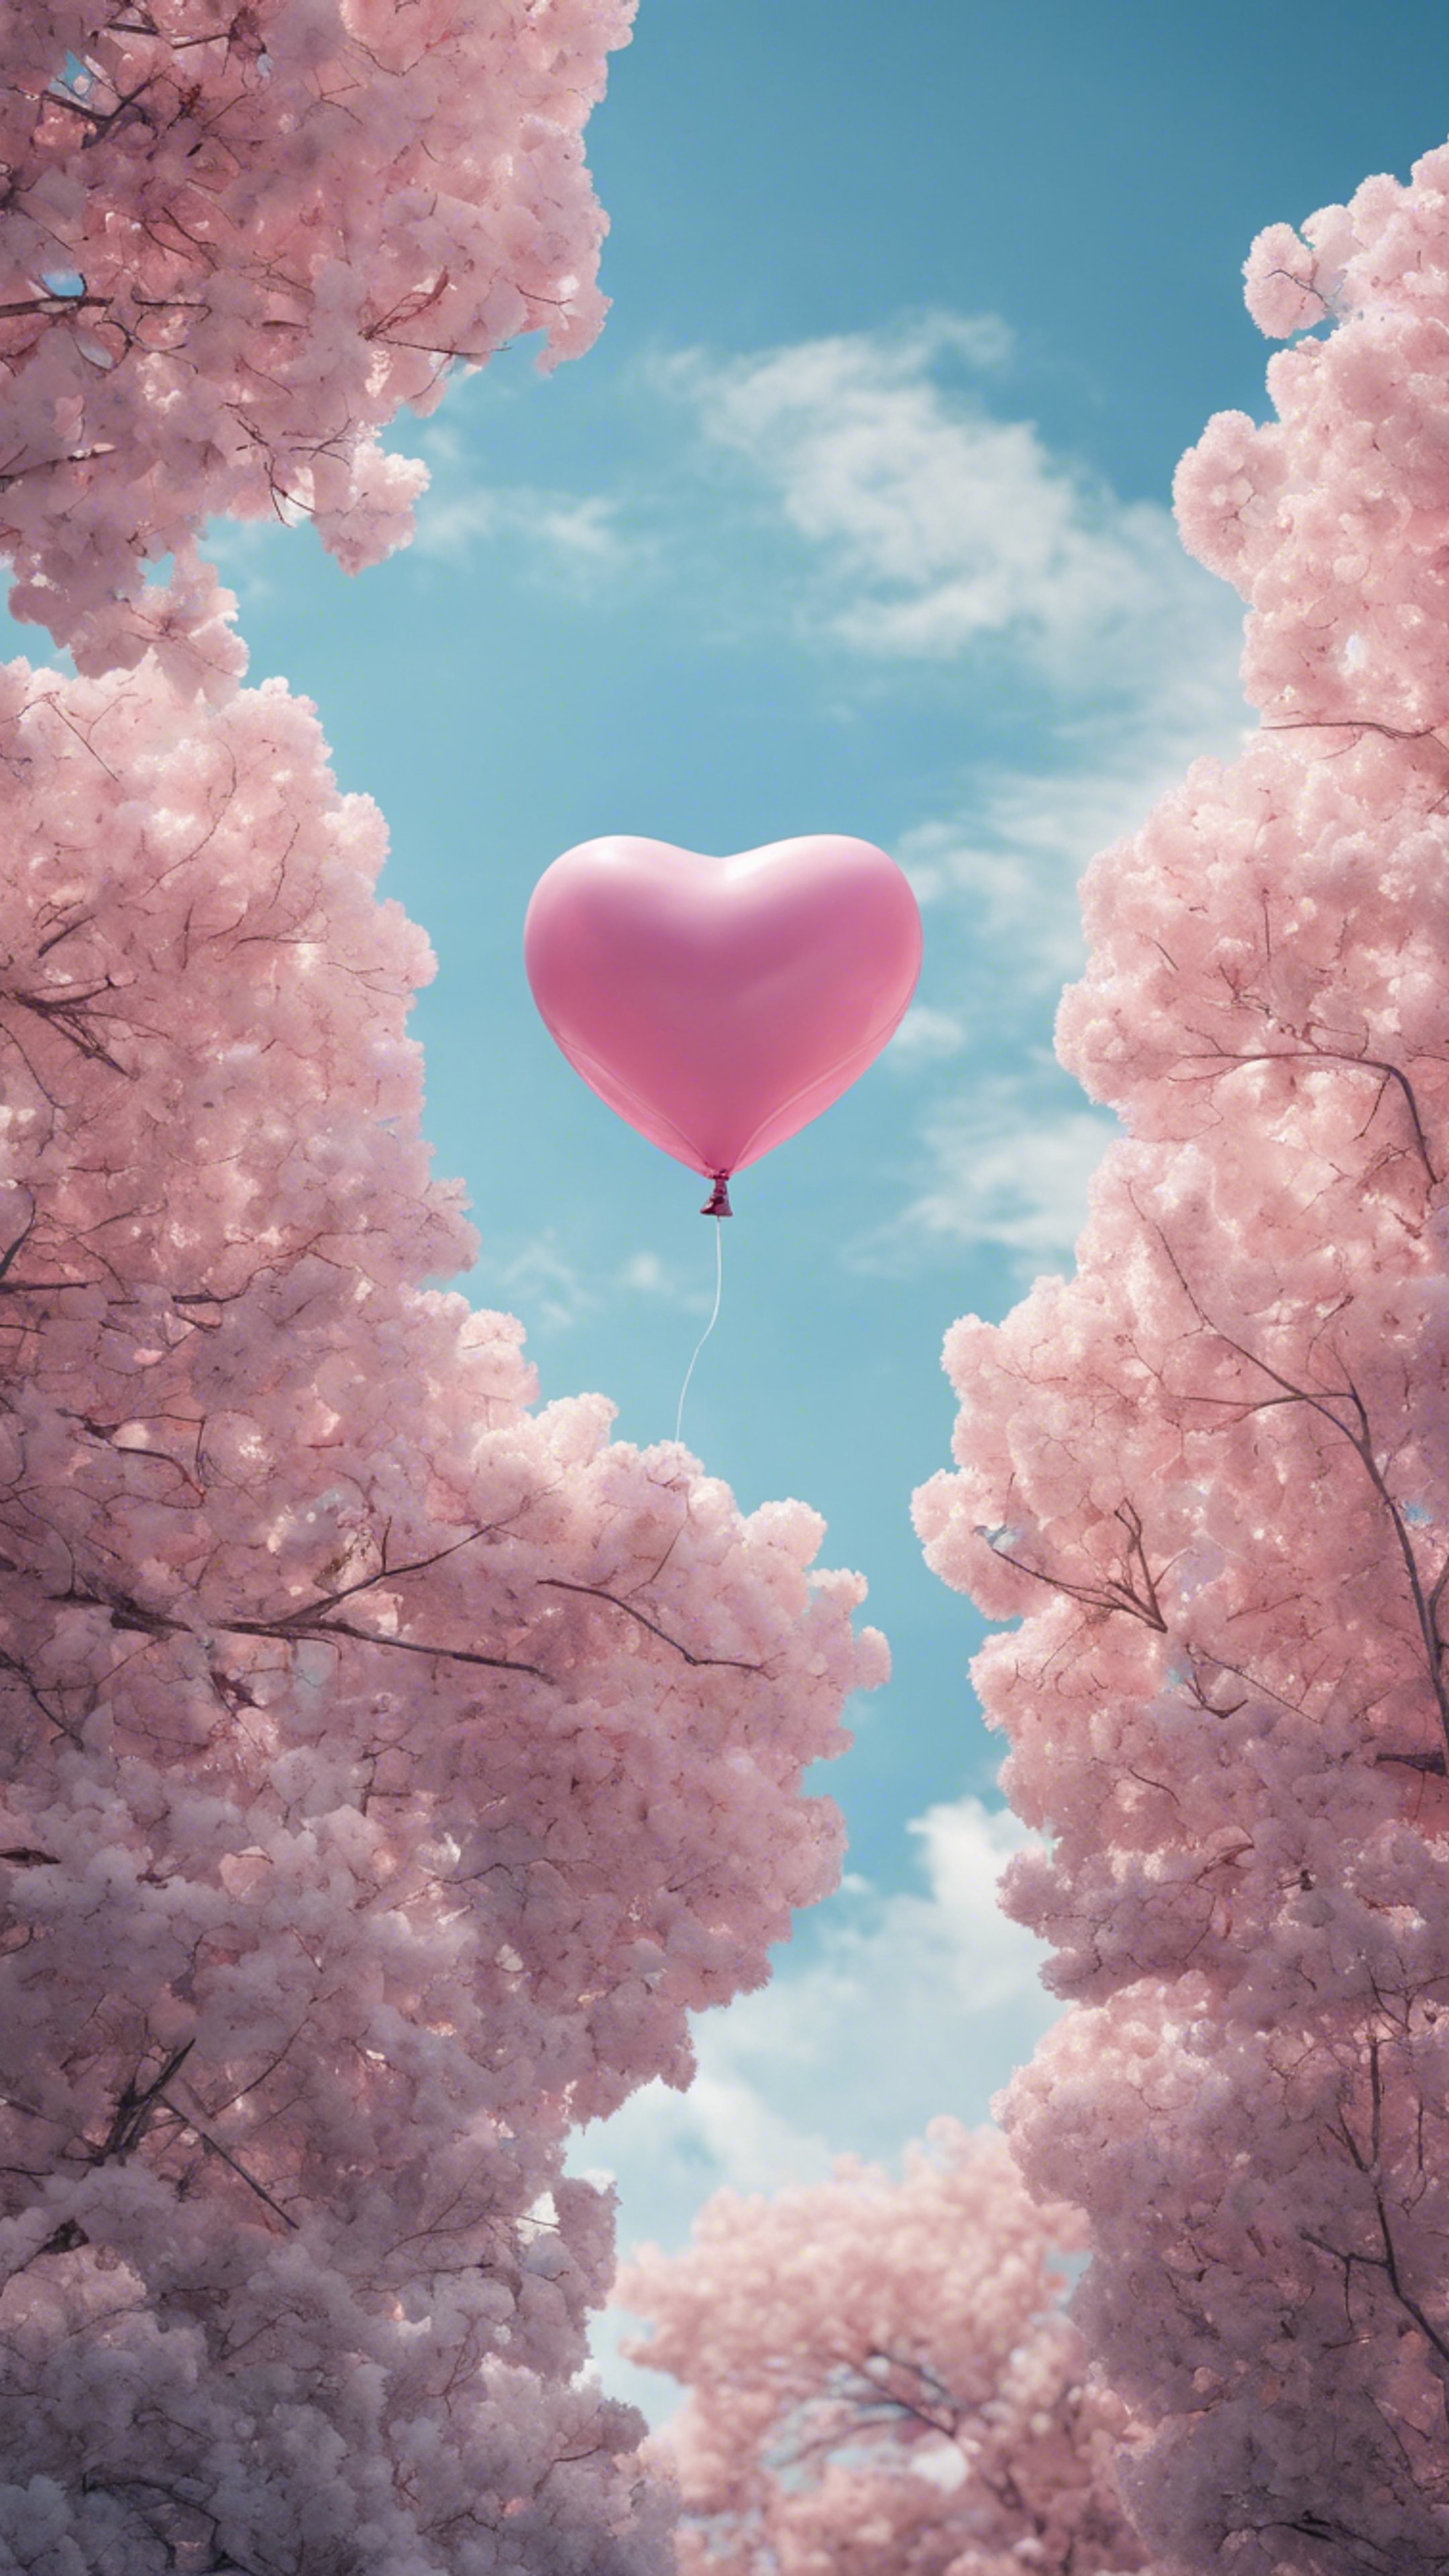 A pink heart-shaped balloon floating in the blue sky. Papel de parede[cd7c71404dc64bc7bb7c]